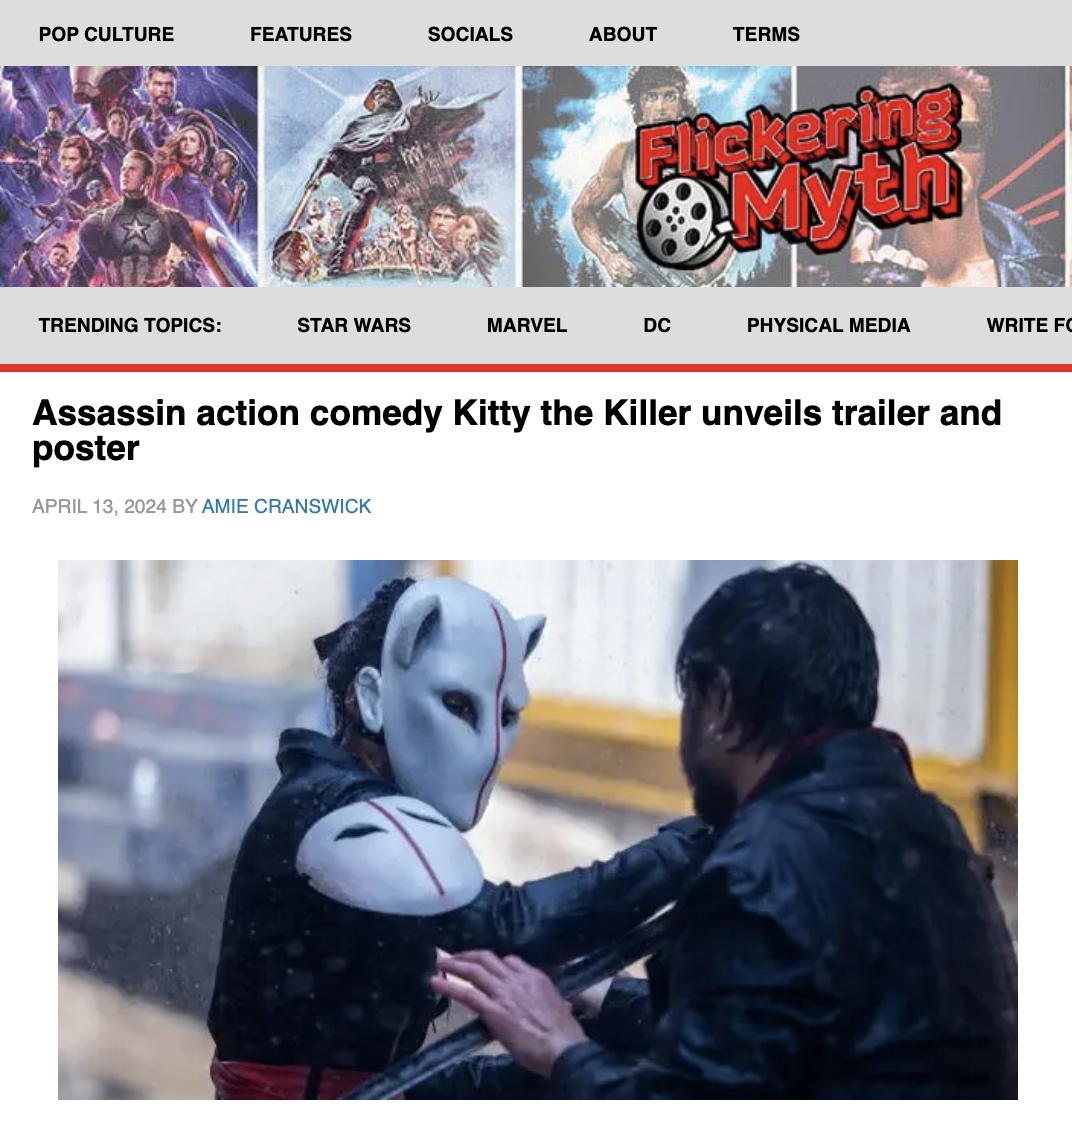 Assassin action comedy Kitty the Killer unveils trailer and poster